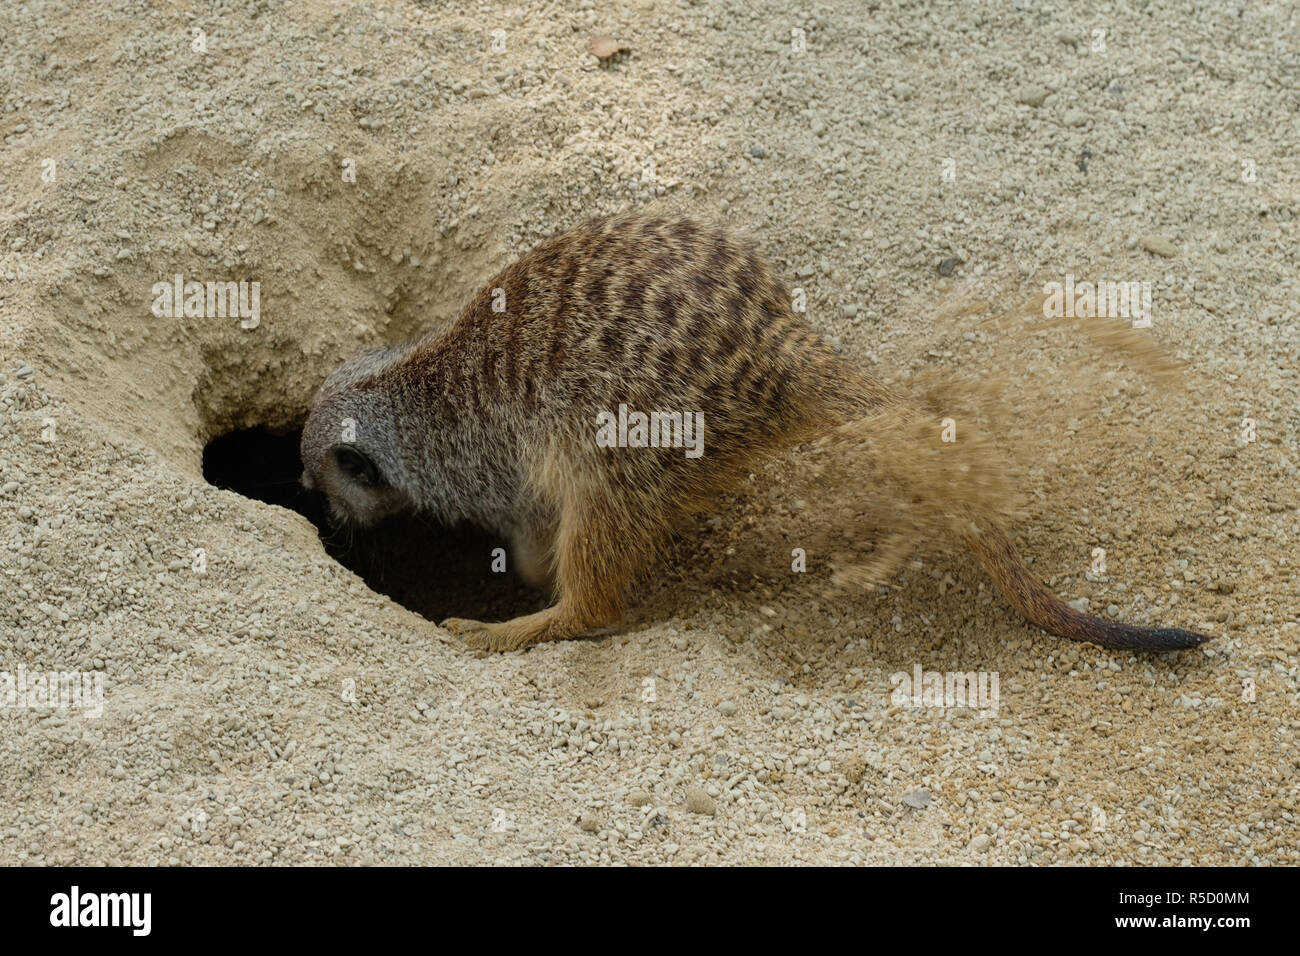 meerkat digs a cave in the ground Stock Photo